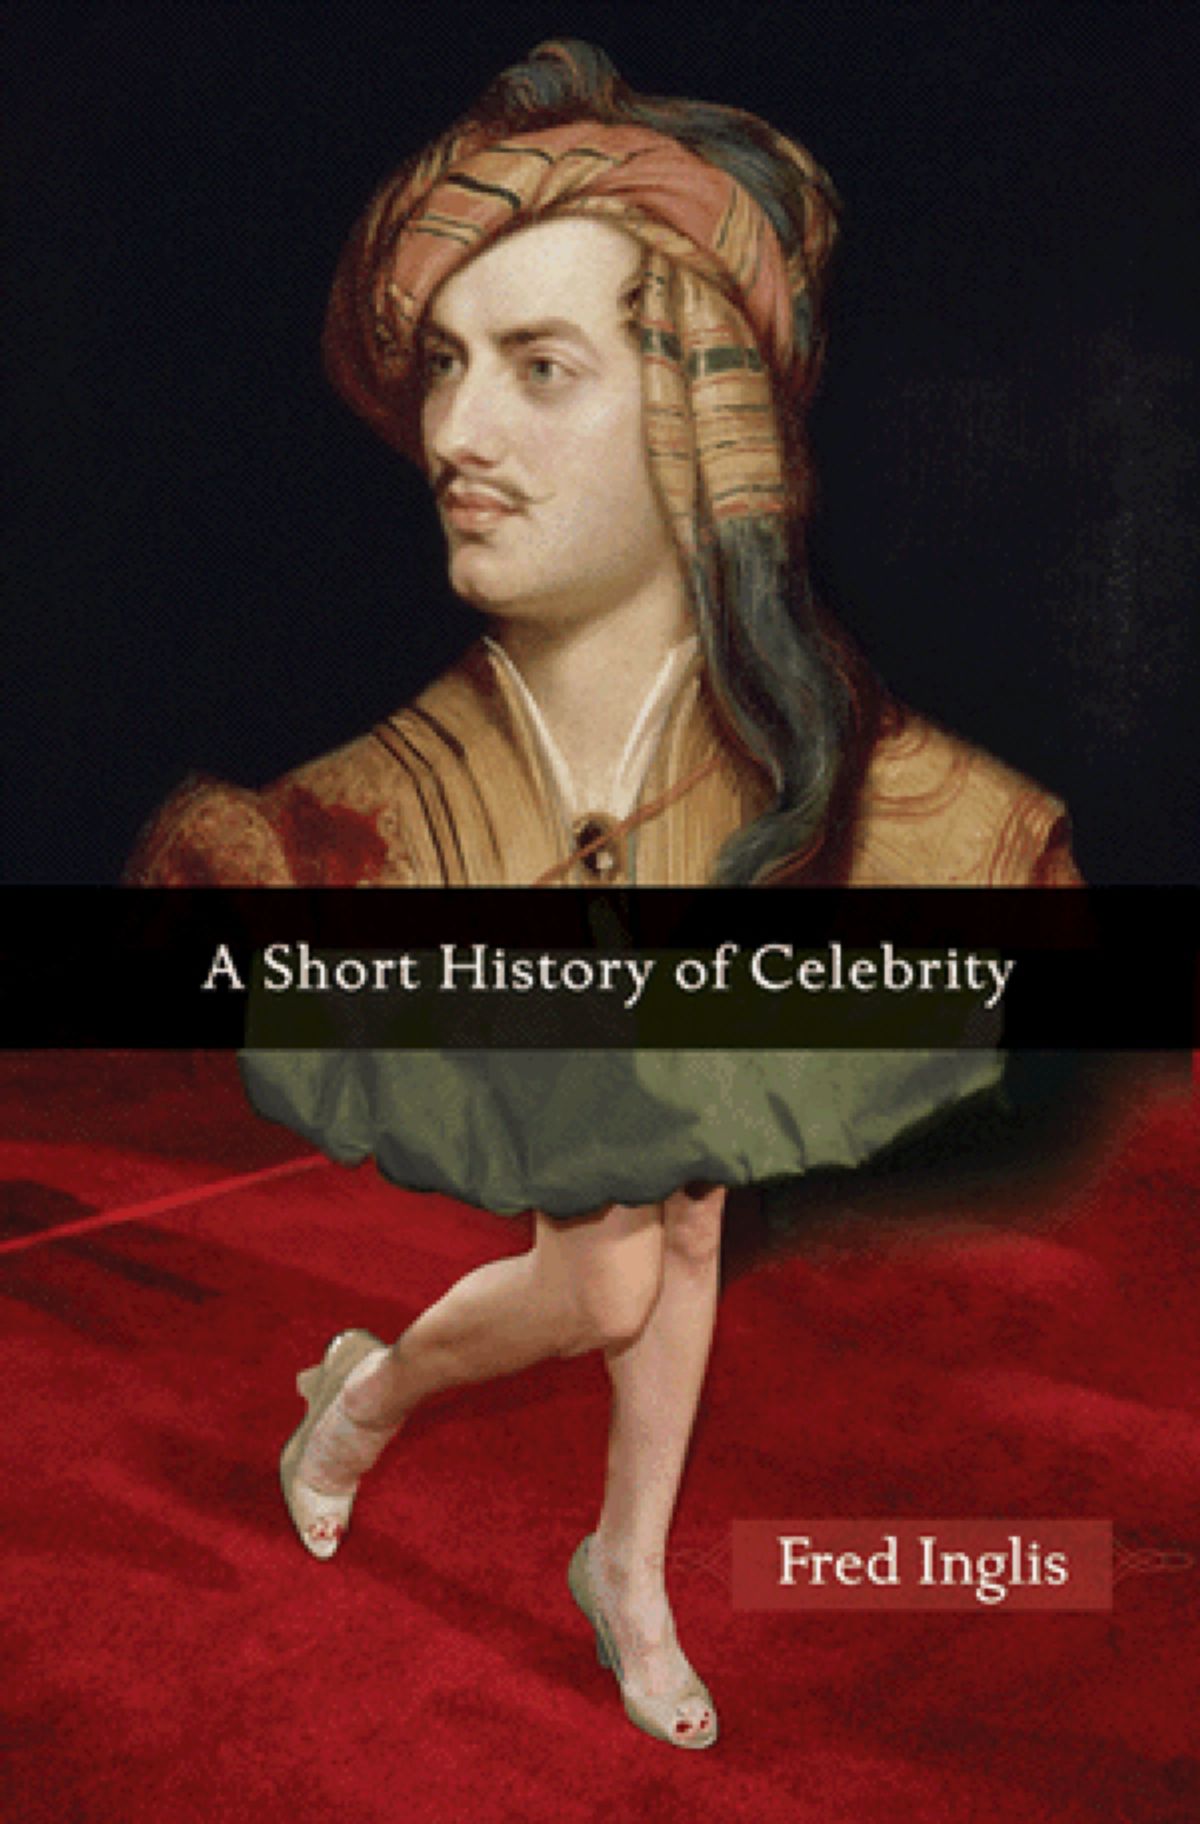 "A Short History of Celebrity" by Fred Inglis  